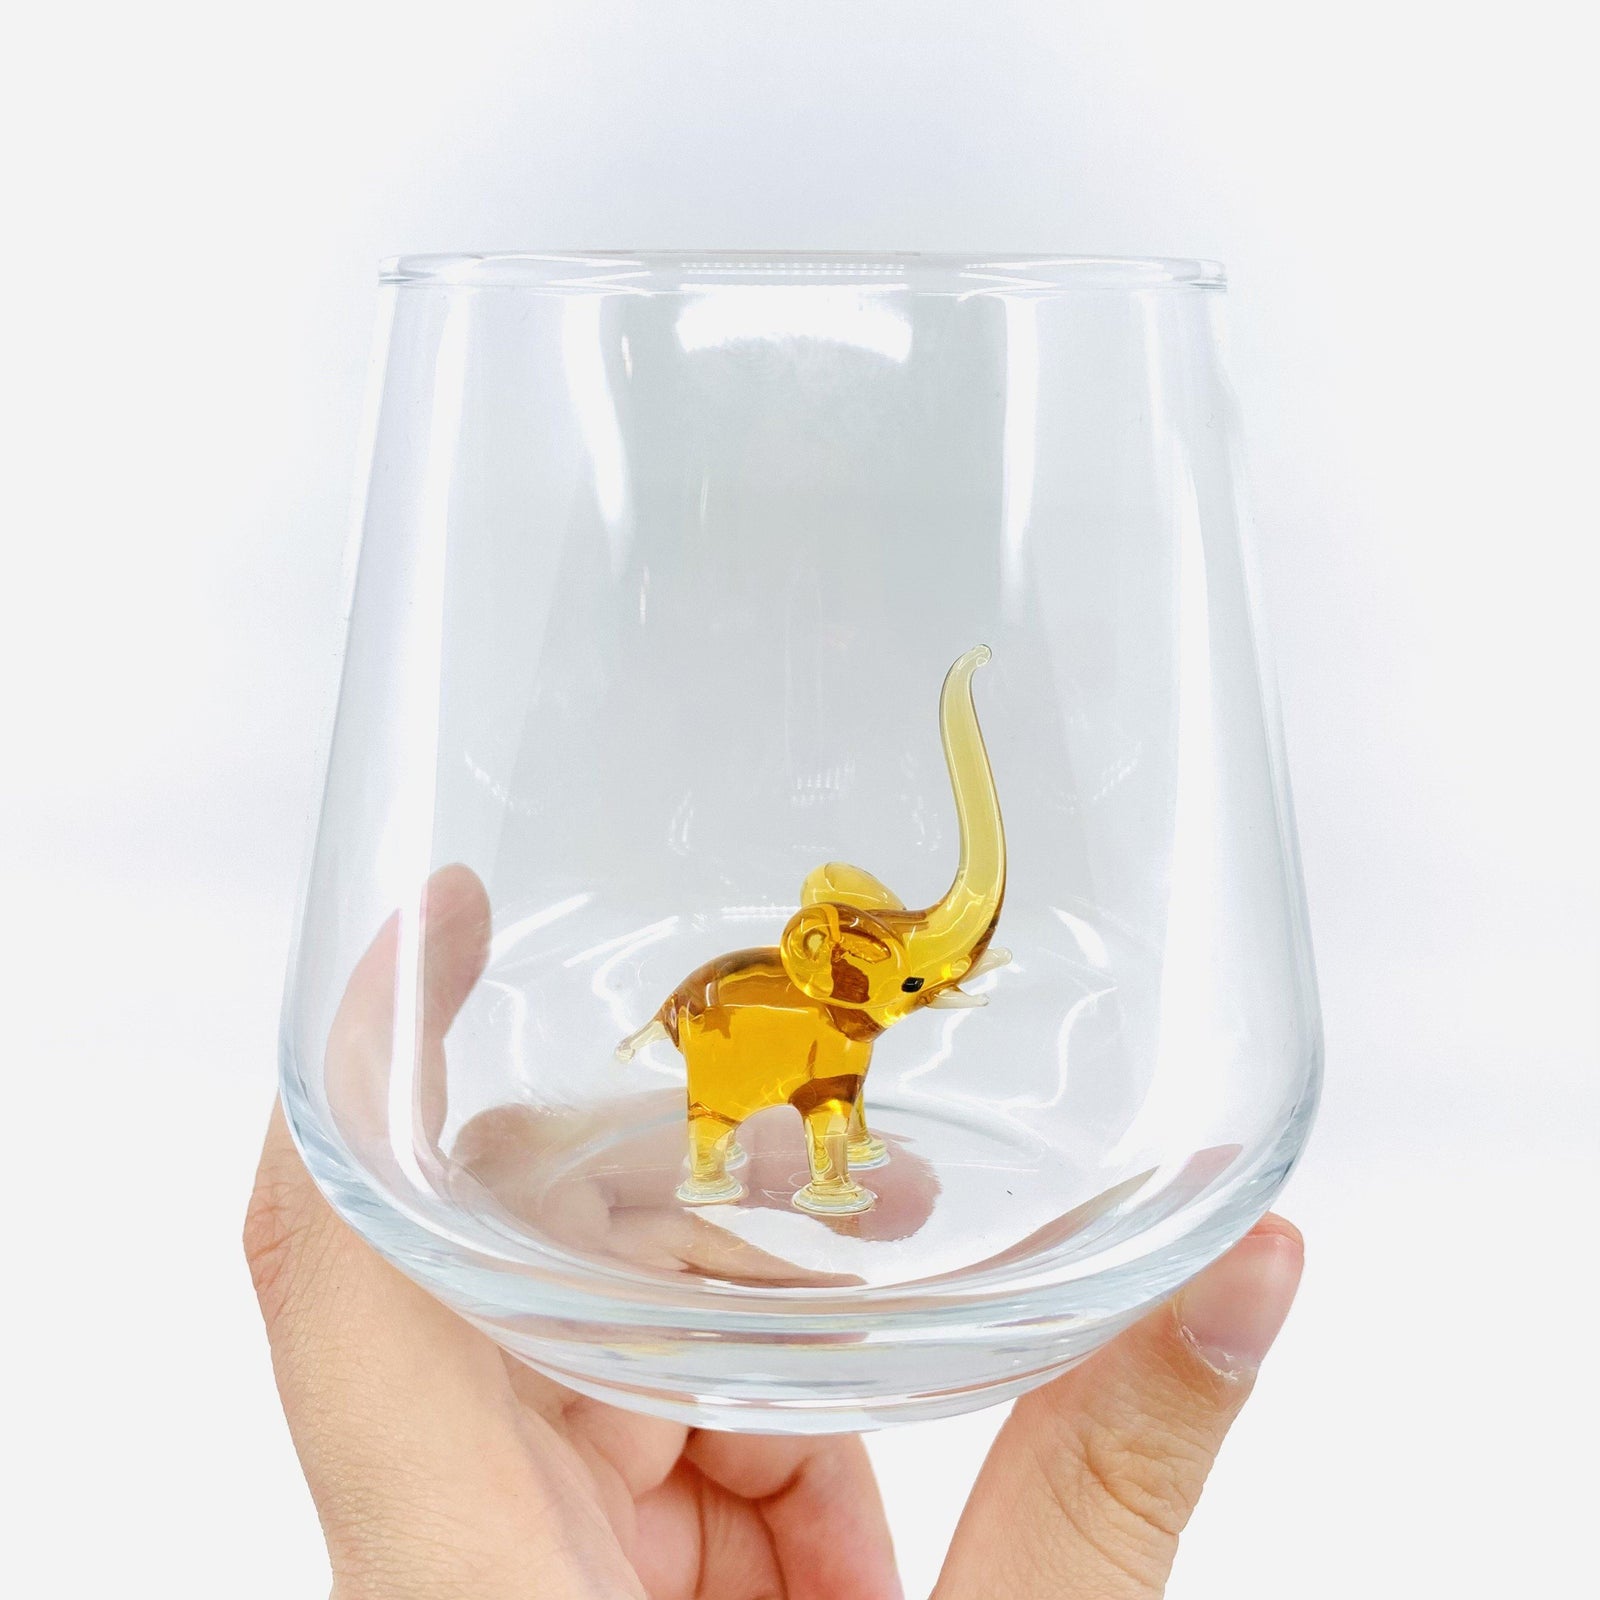 Mixed Drinking Glass Set of 6 with Handmade Animal Figures – MiniZooUSA